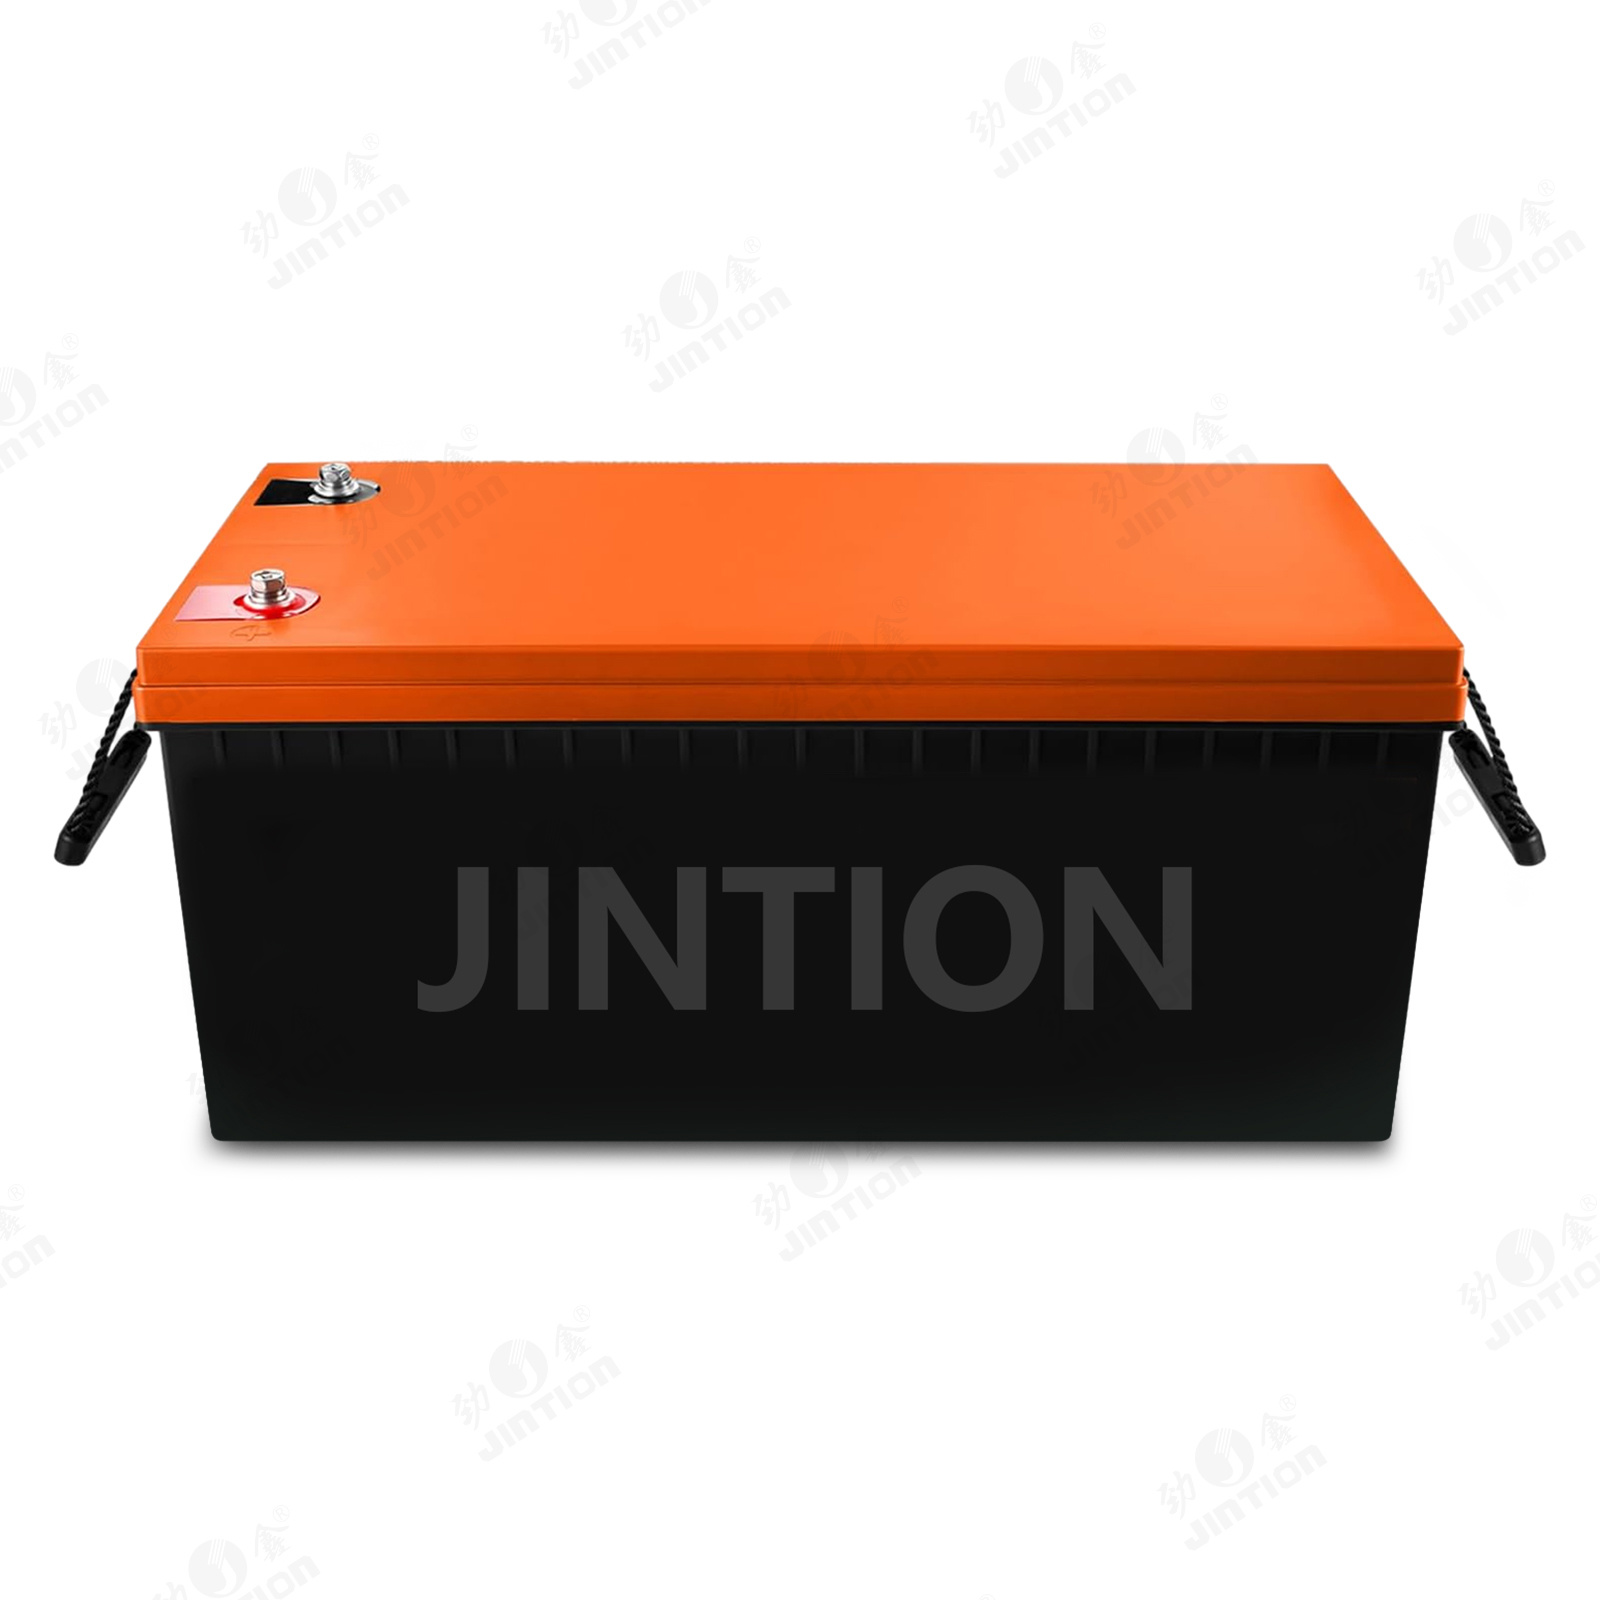 JINTION 48v lifepo4 battery 100ah lifepo4 battery lifepo4 Built-in BMS Lithium Iron Phosphate Over 4000+ Rechargeable Cycles